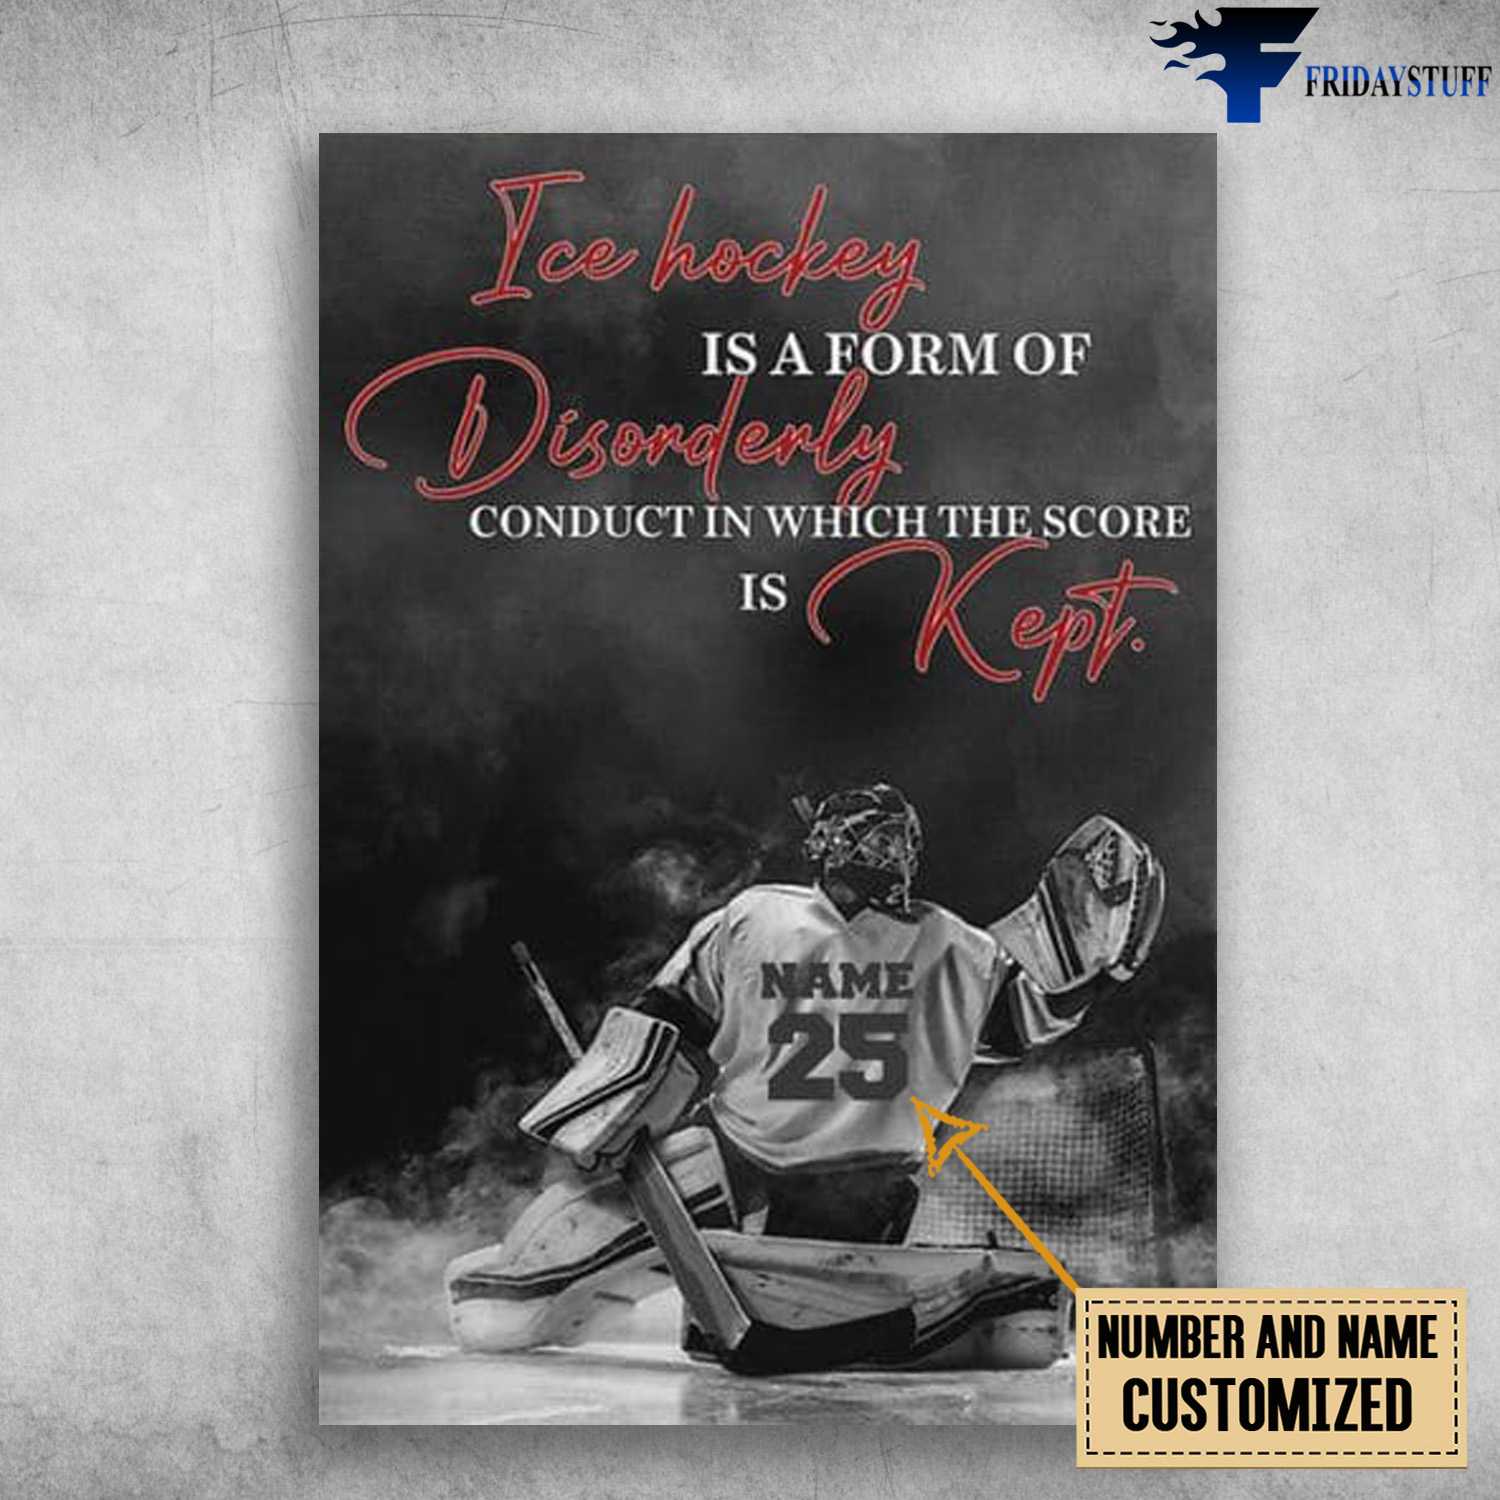 Hockey Poster, Ice Hockey Is A Form Of Disorderly, Conduct In Which The Score Is Kept